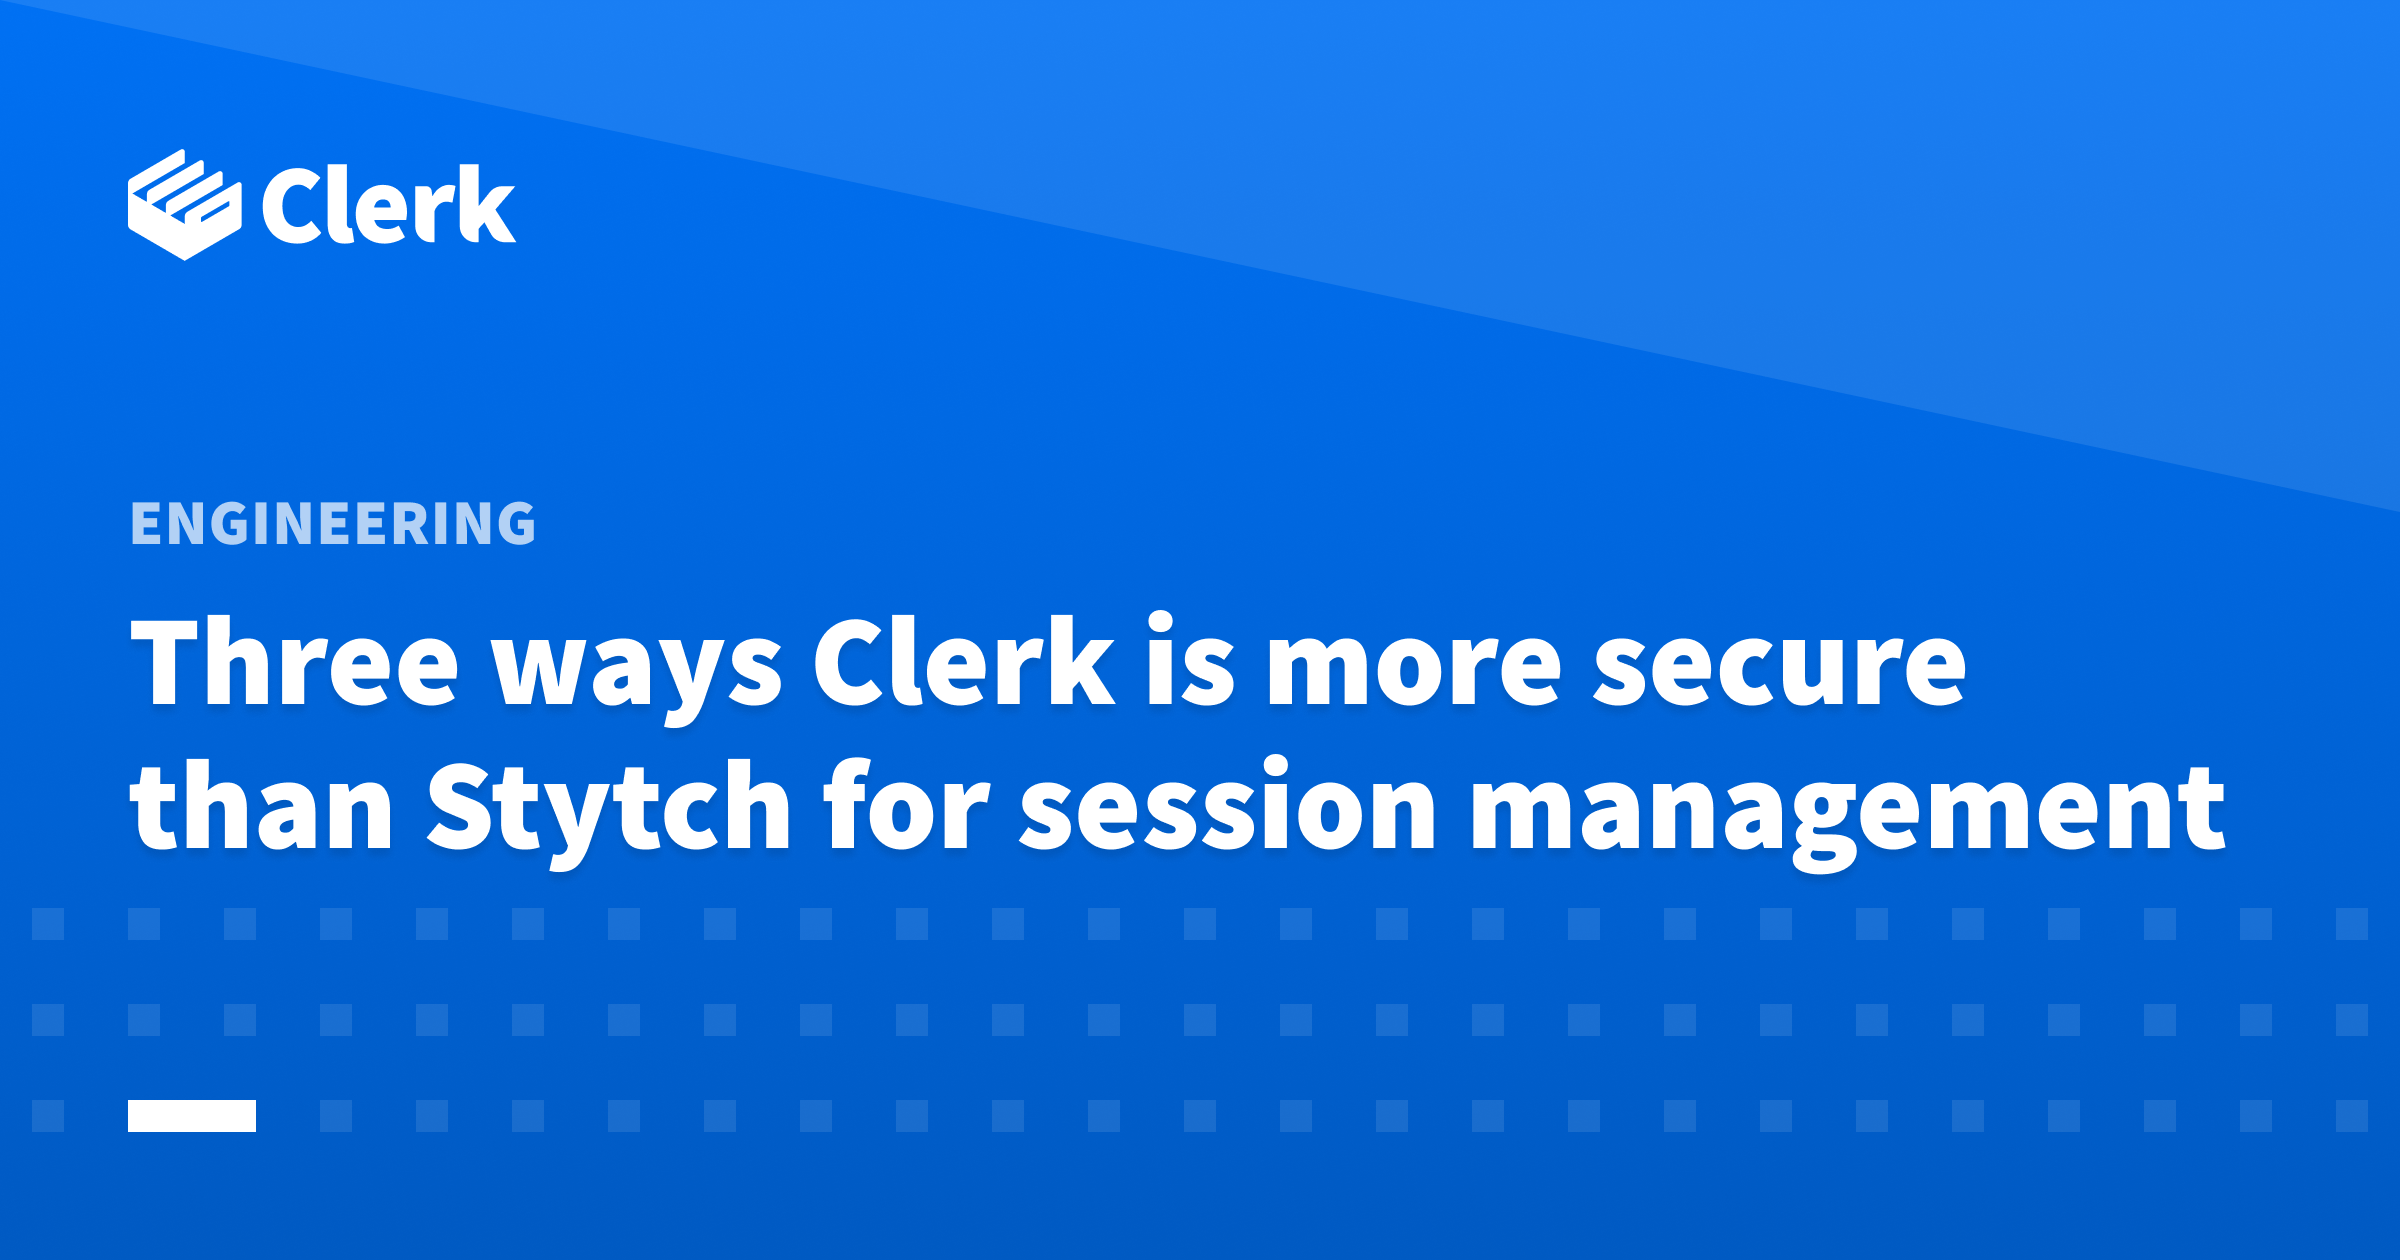 Three ways Clerk is more secure than Stytch for session management